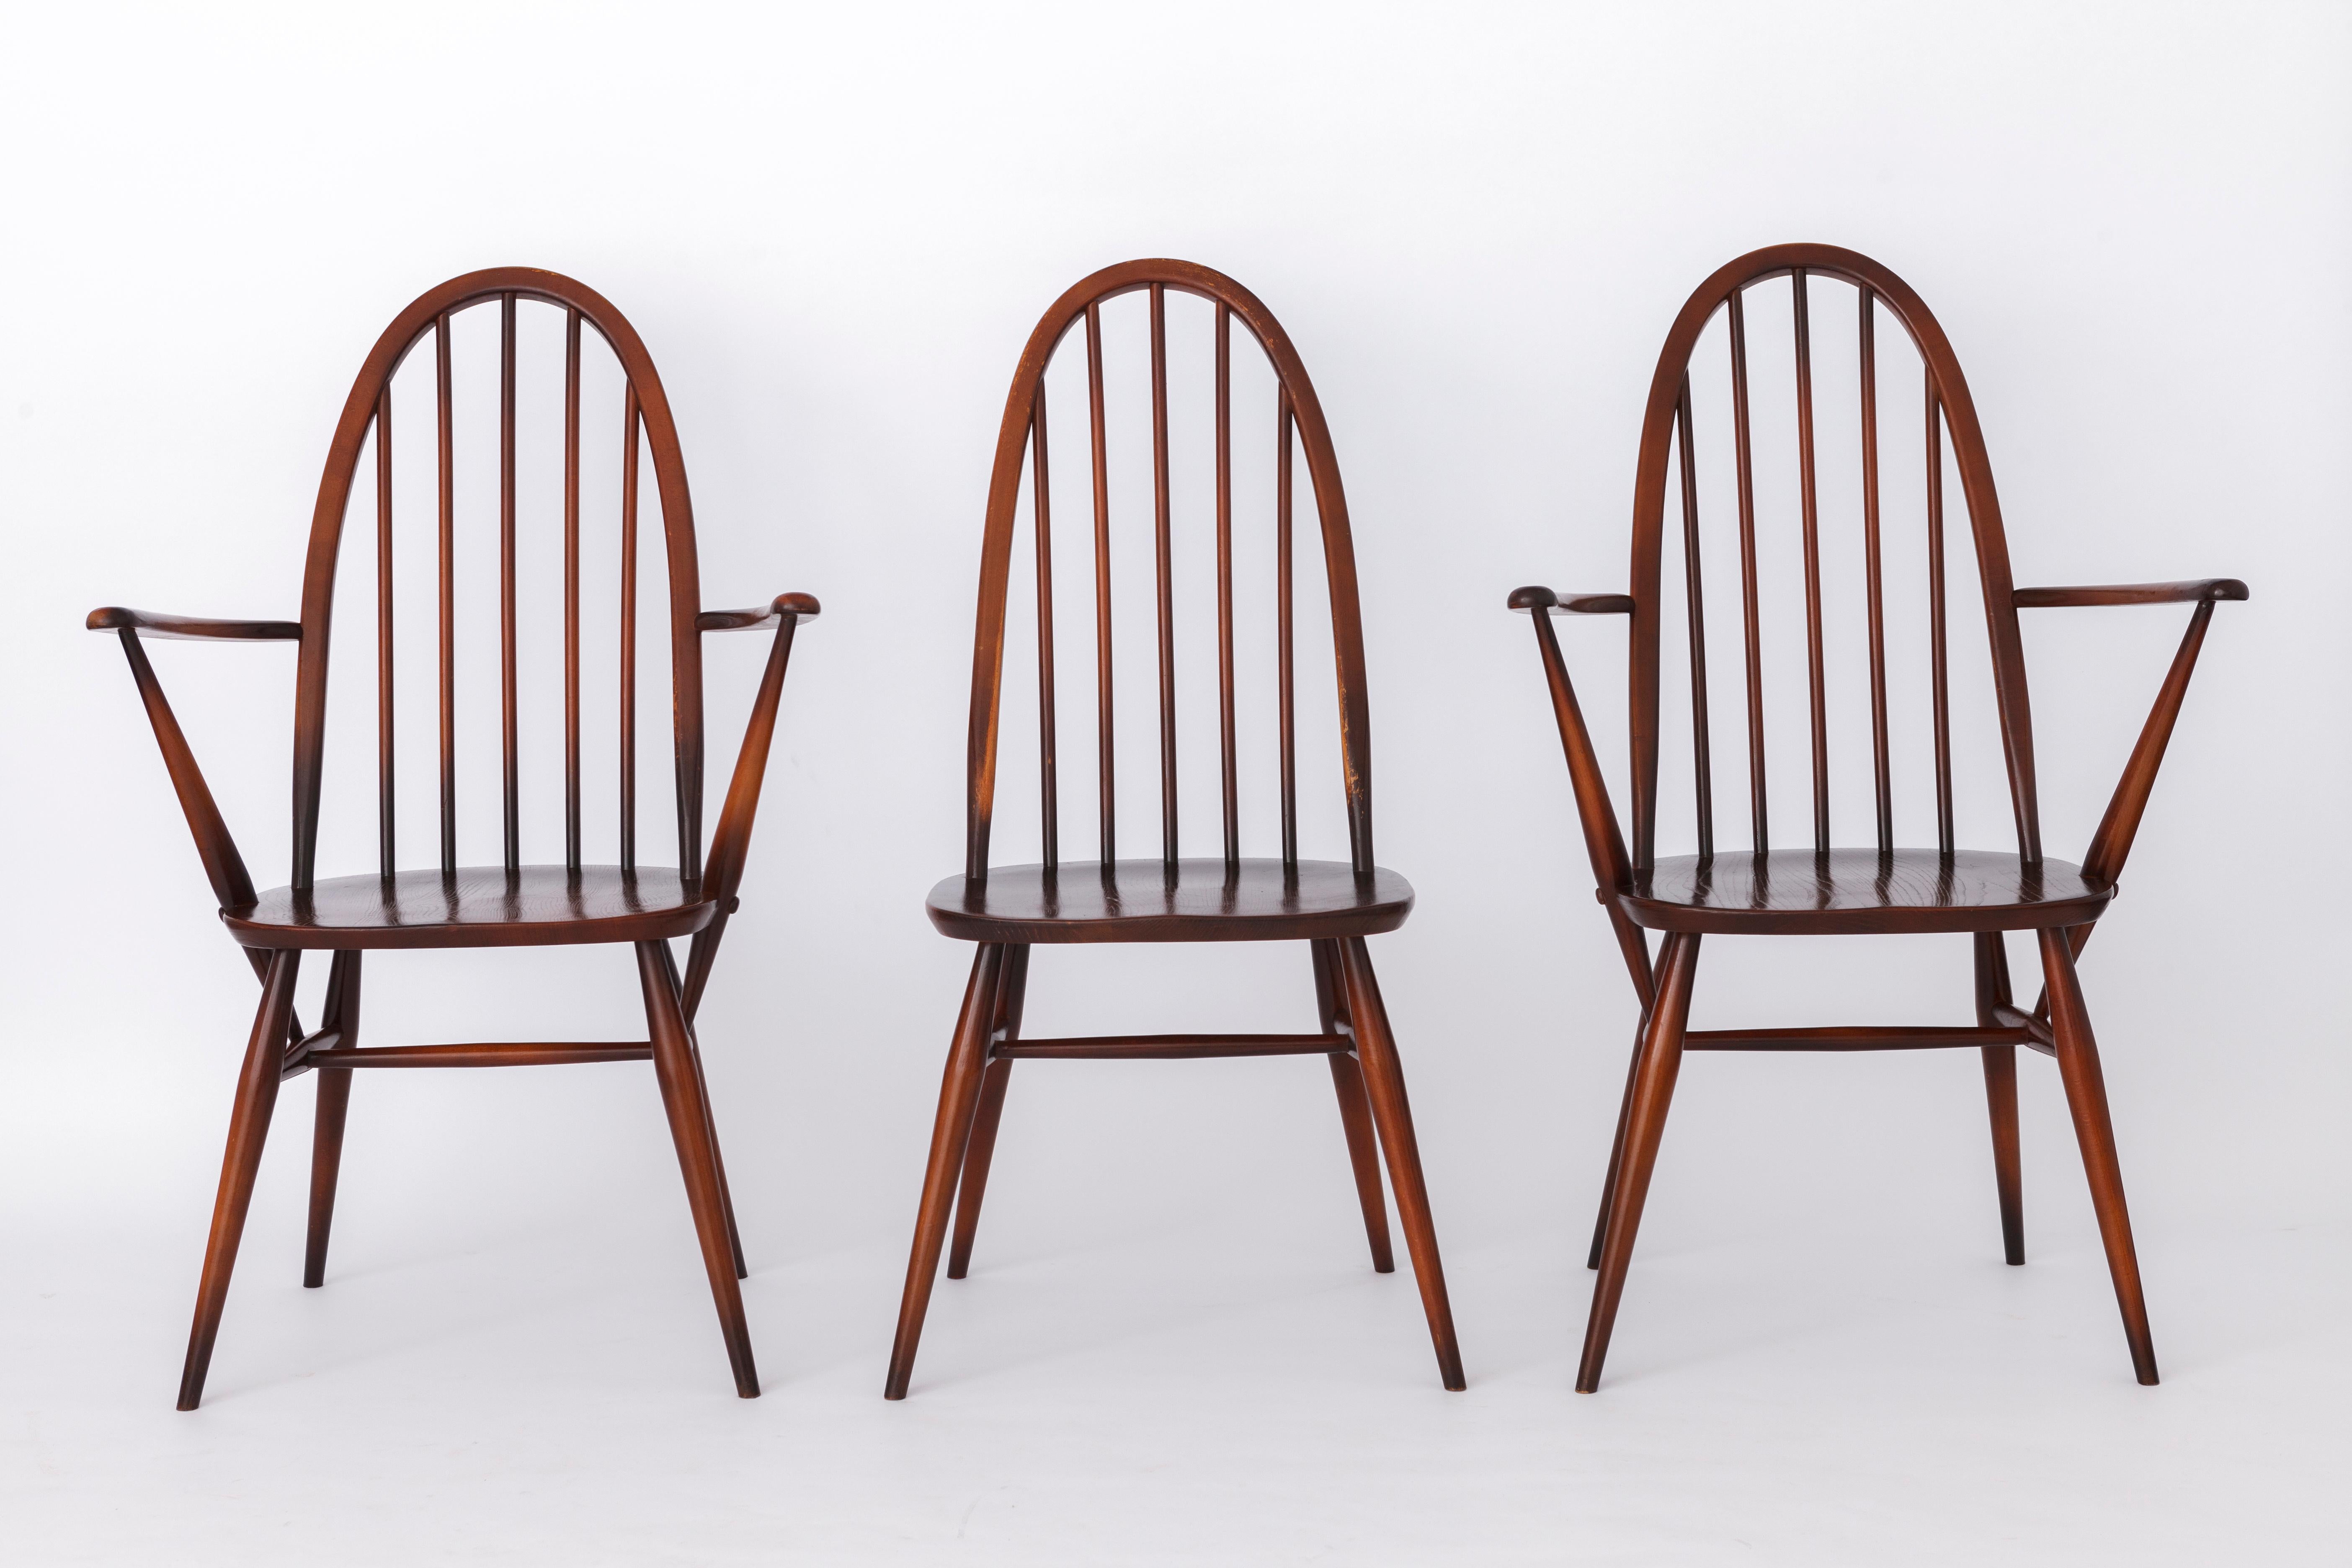 Nice set of 6 quaker chairs by manufacturer Ercol, England. 
Production period: 1960s. 
Displayed price is for a set of 6. (Two armchairs + 4 side chairs)

Sturdy dyed beech wood frame. Refurbished and oiled. 
Manufacturer mark under the seat. 